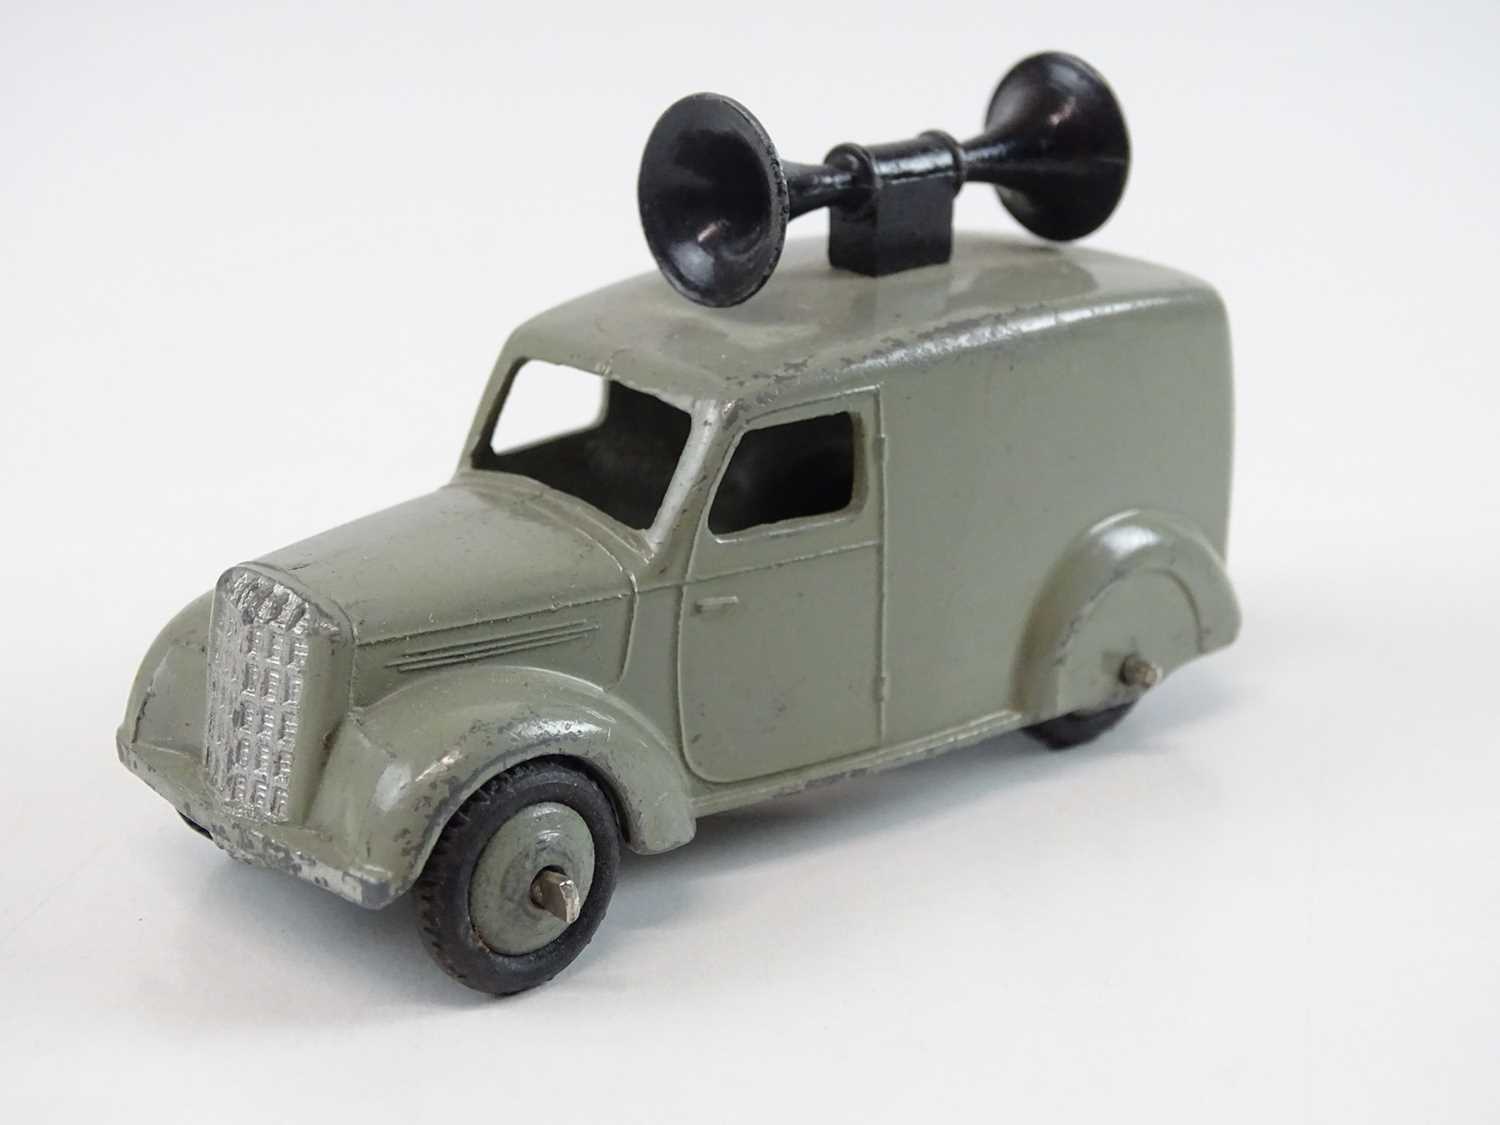 A DINKY 34C Loud Speaker Van trade box complete with 6 examples of the model, 2 in grey and 4 in - Image 10 of 13